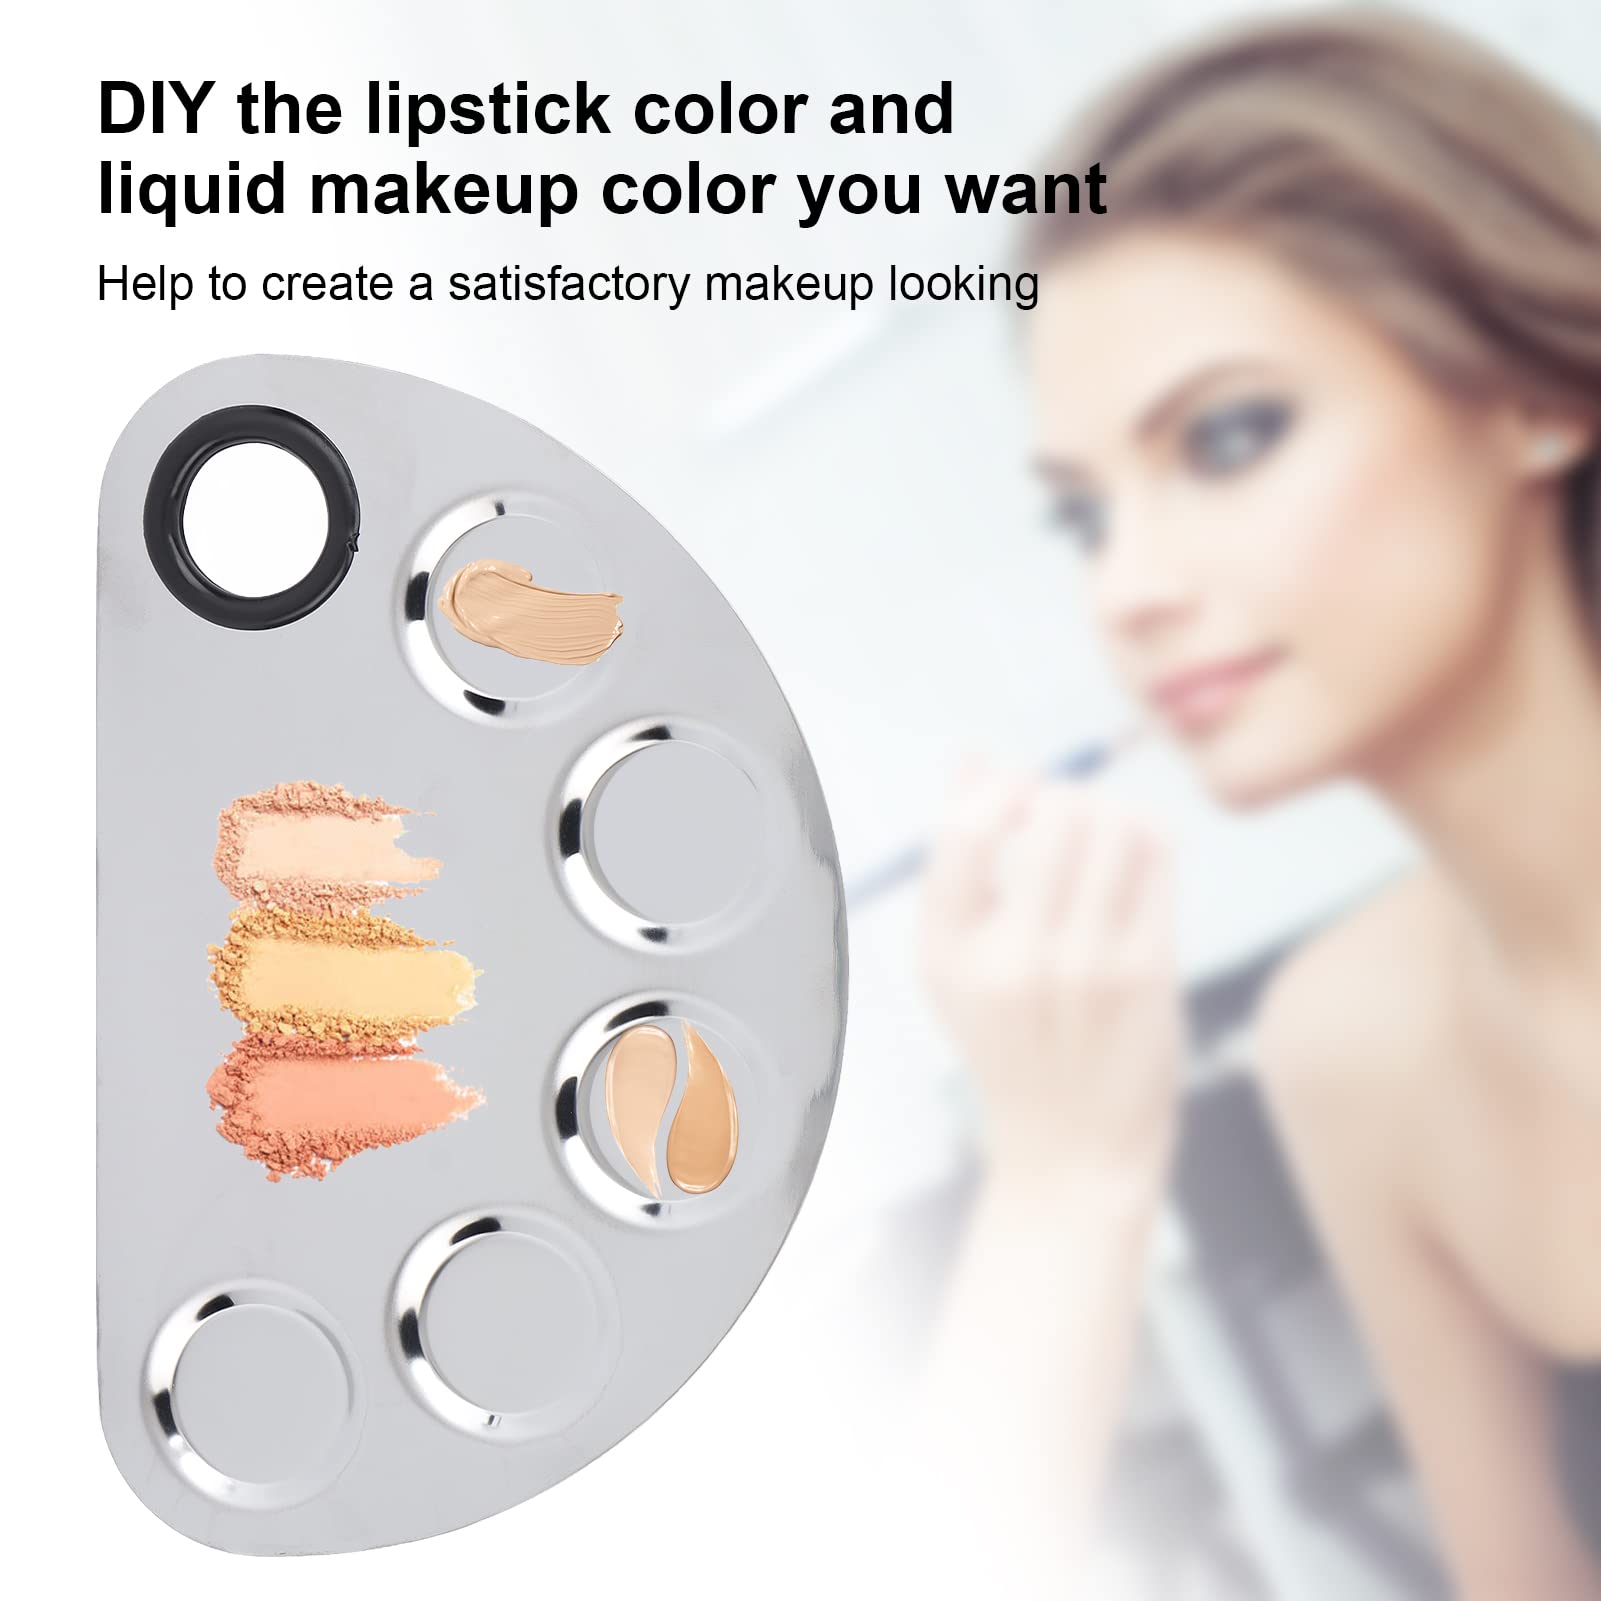 Makeup Mixing Palette,DIY Cosmetic Color Mixing Plate,Professional Makeup Palette,Stainless Steel Spatula Paint Pigment Lipstick Color Blending Plate,Easy to Clean,Double Ended Shovel Design, sta